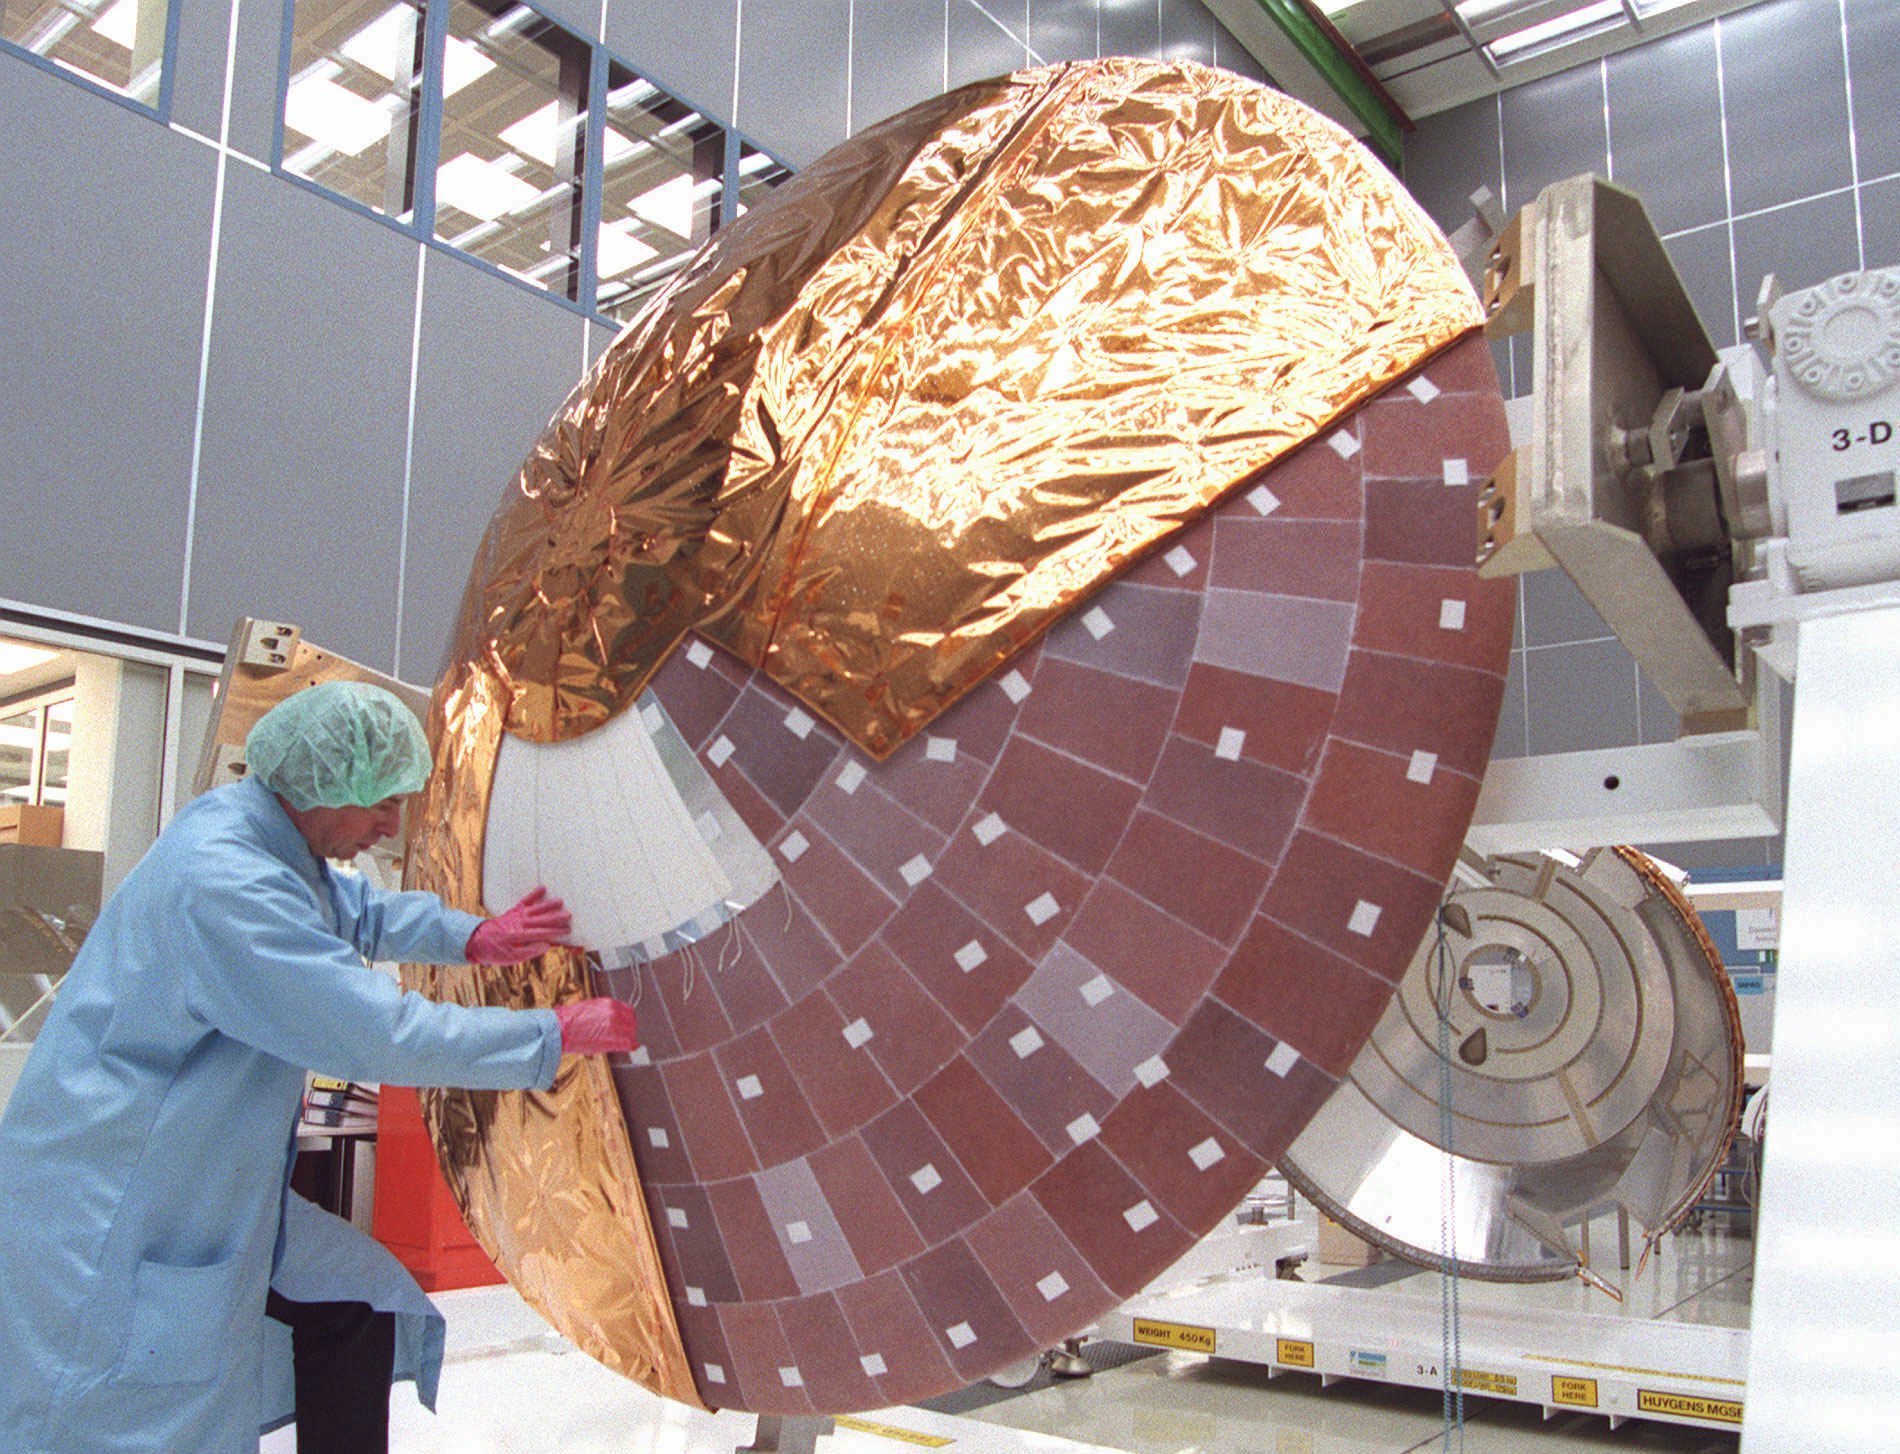 FILE - In this Wednesday, March 26, 1997 file photo, a technician checks the heatshield of the space probe Huygens in the cleanroom of Dornier Satellitensysteme GmbH in Ottobrunn, Germany, near Munich. The probe will be carried by NASA's Cassini orbiter and is designed to explore Saturn's moon Titan. (AP Photo/Uwe Lein)